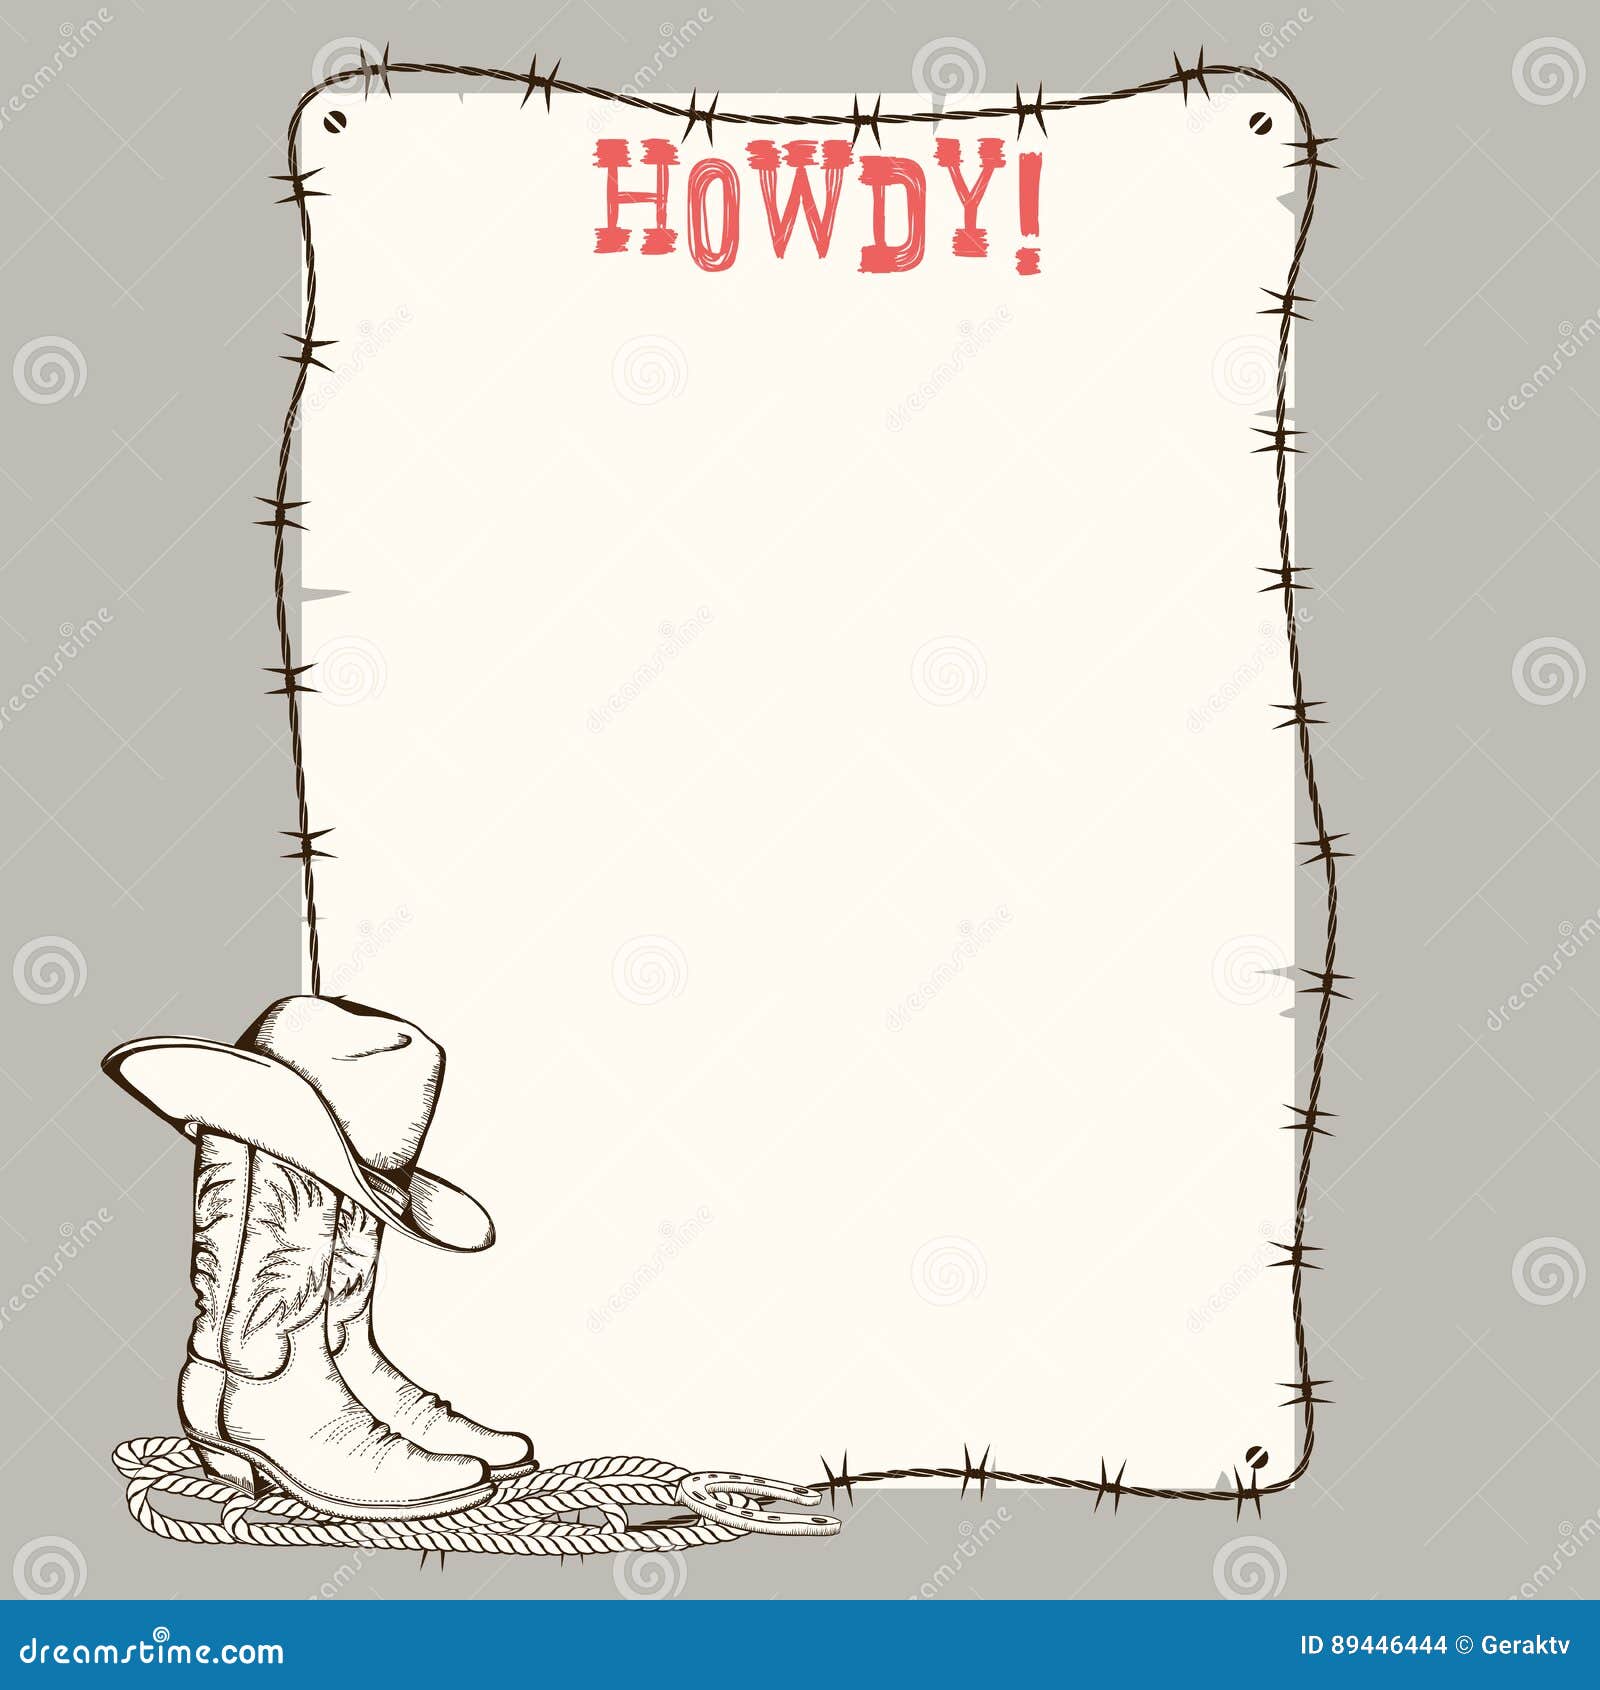 cowboy paper background with western boots and hat for text